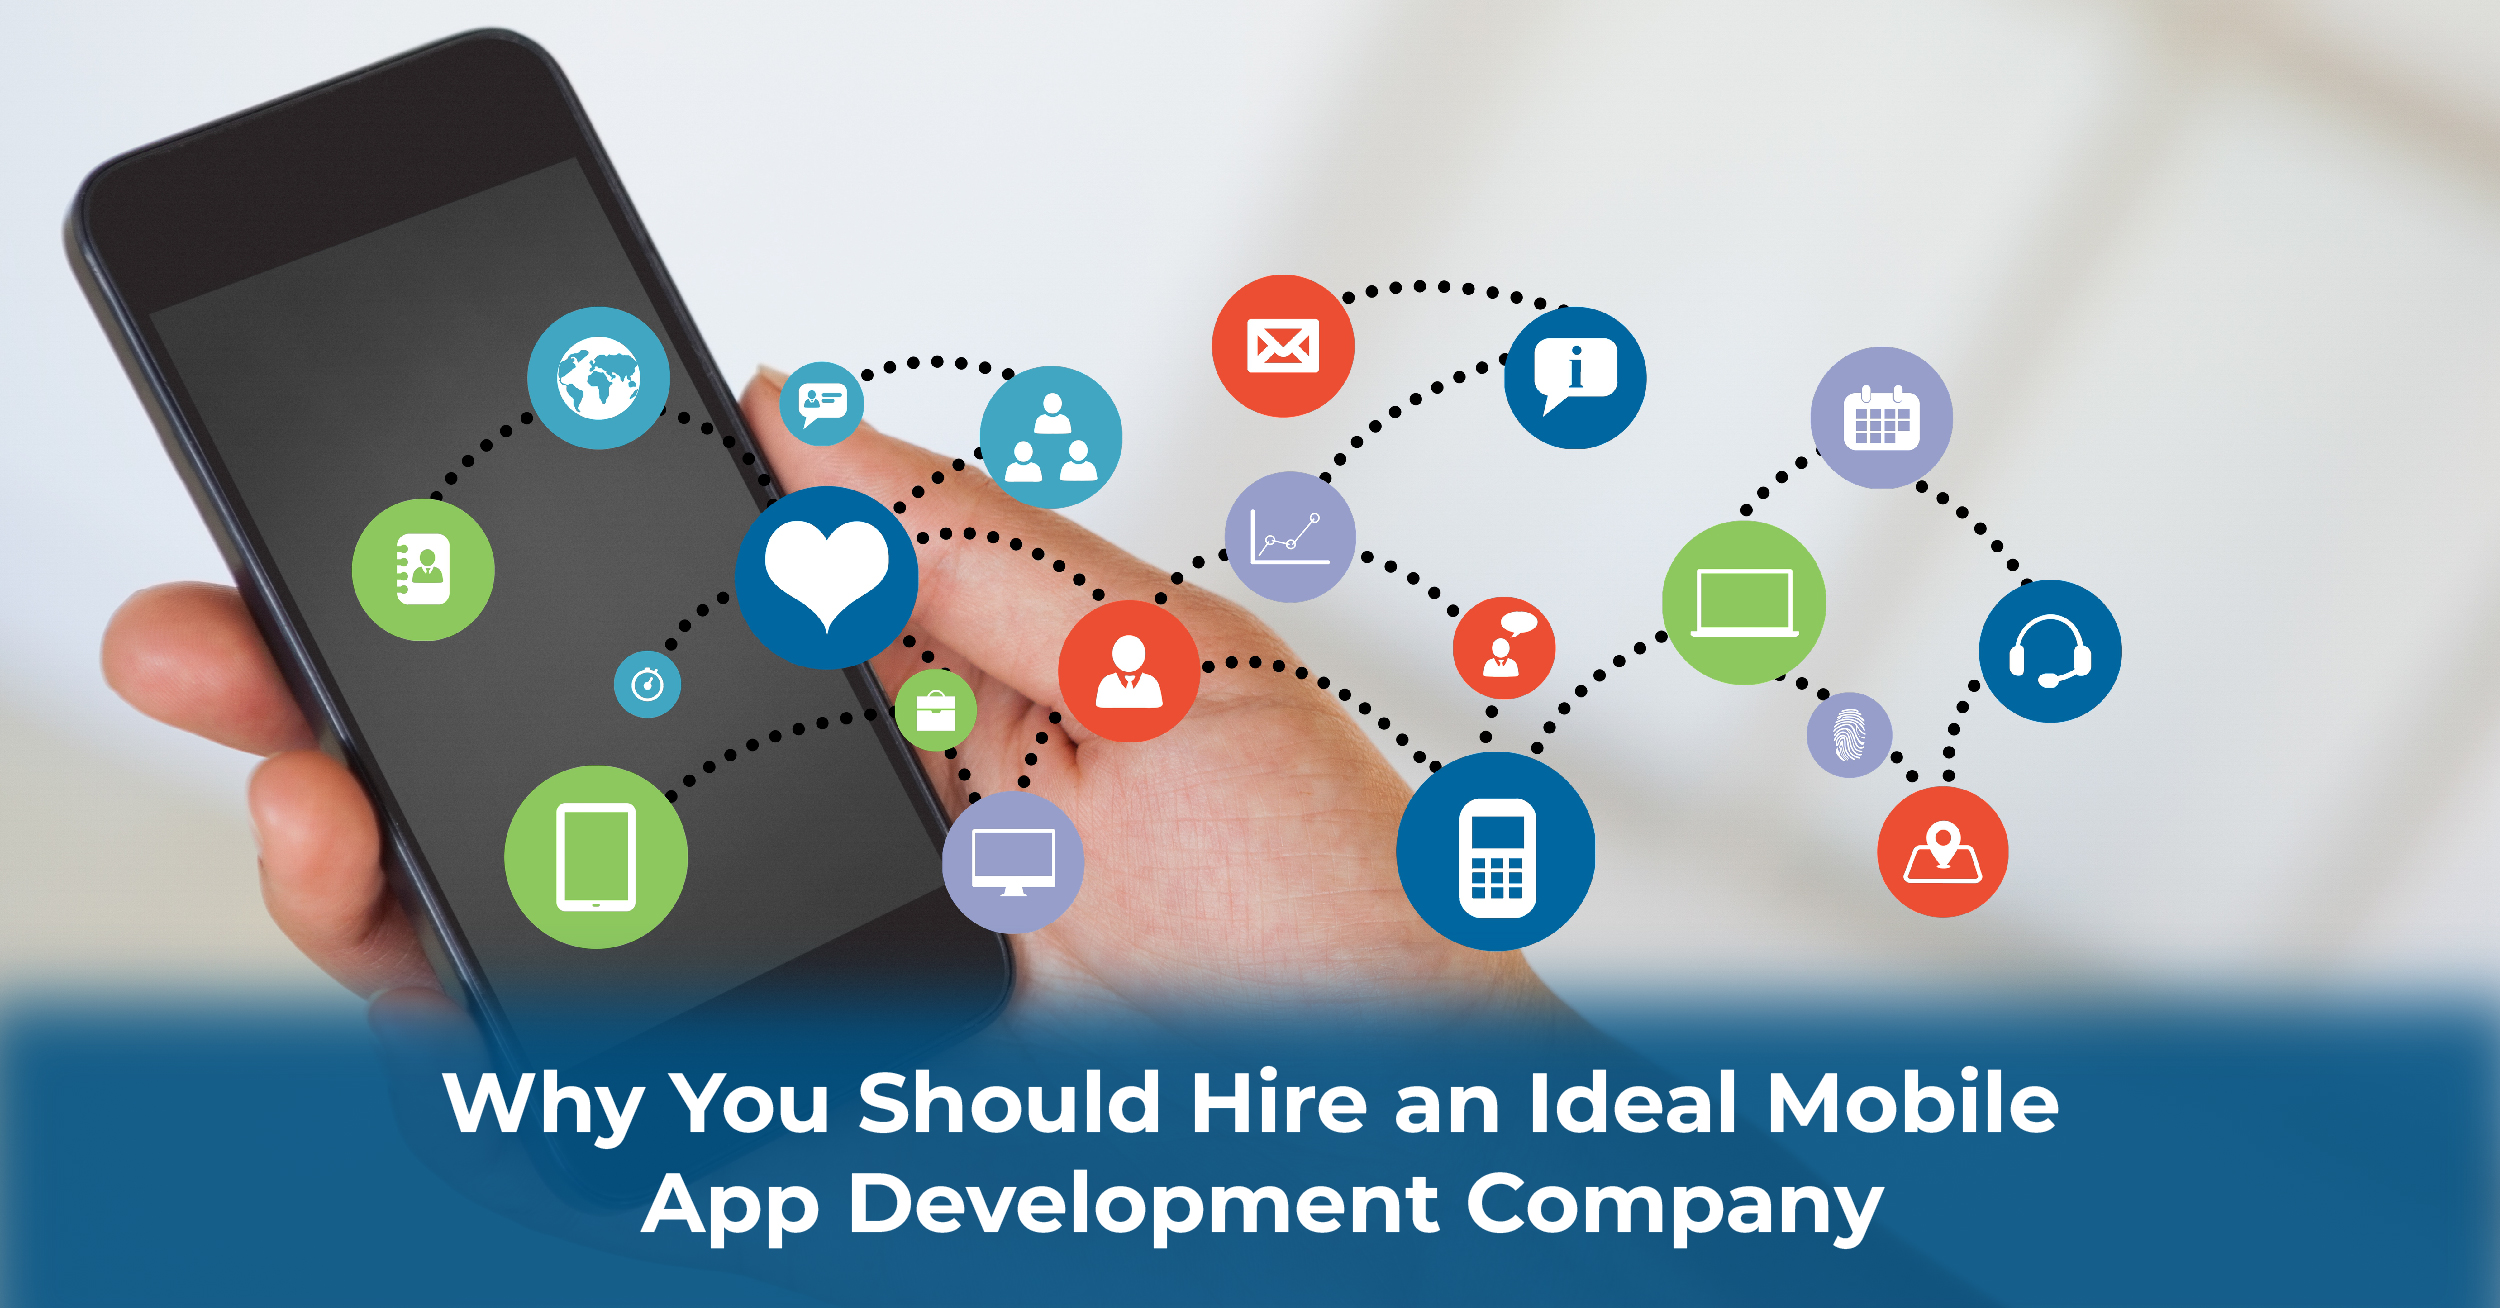 Why You Should Hire an “Ideal” Mobile App Development Company